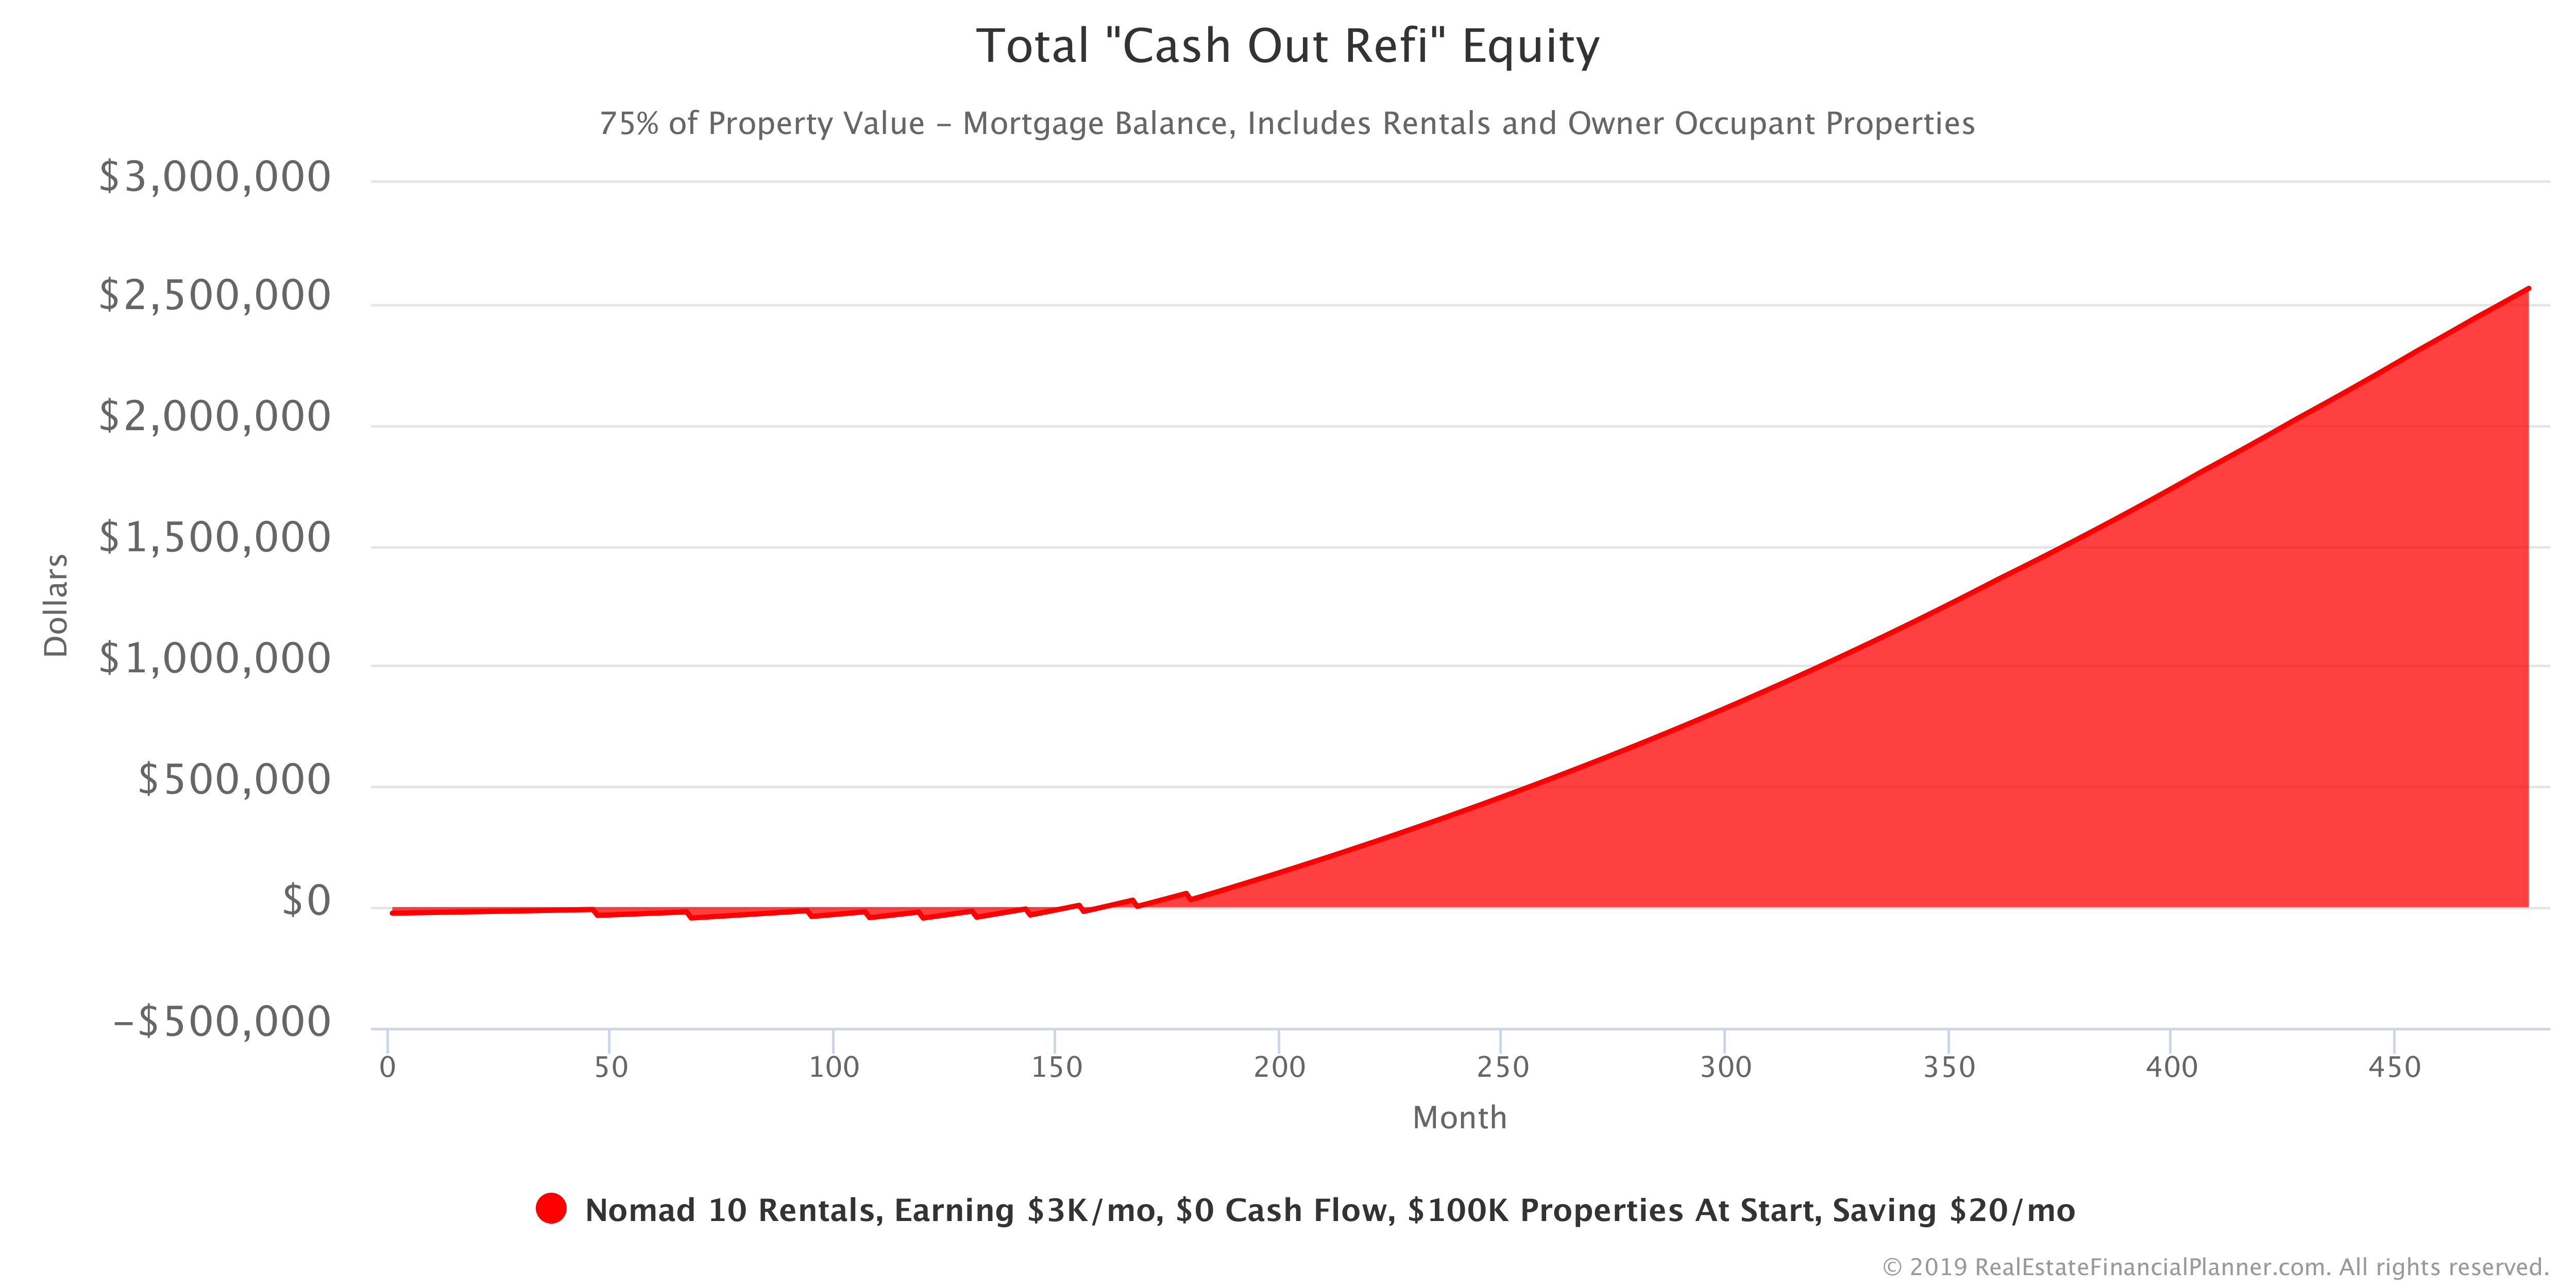 Total Cash Out Refi Equity